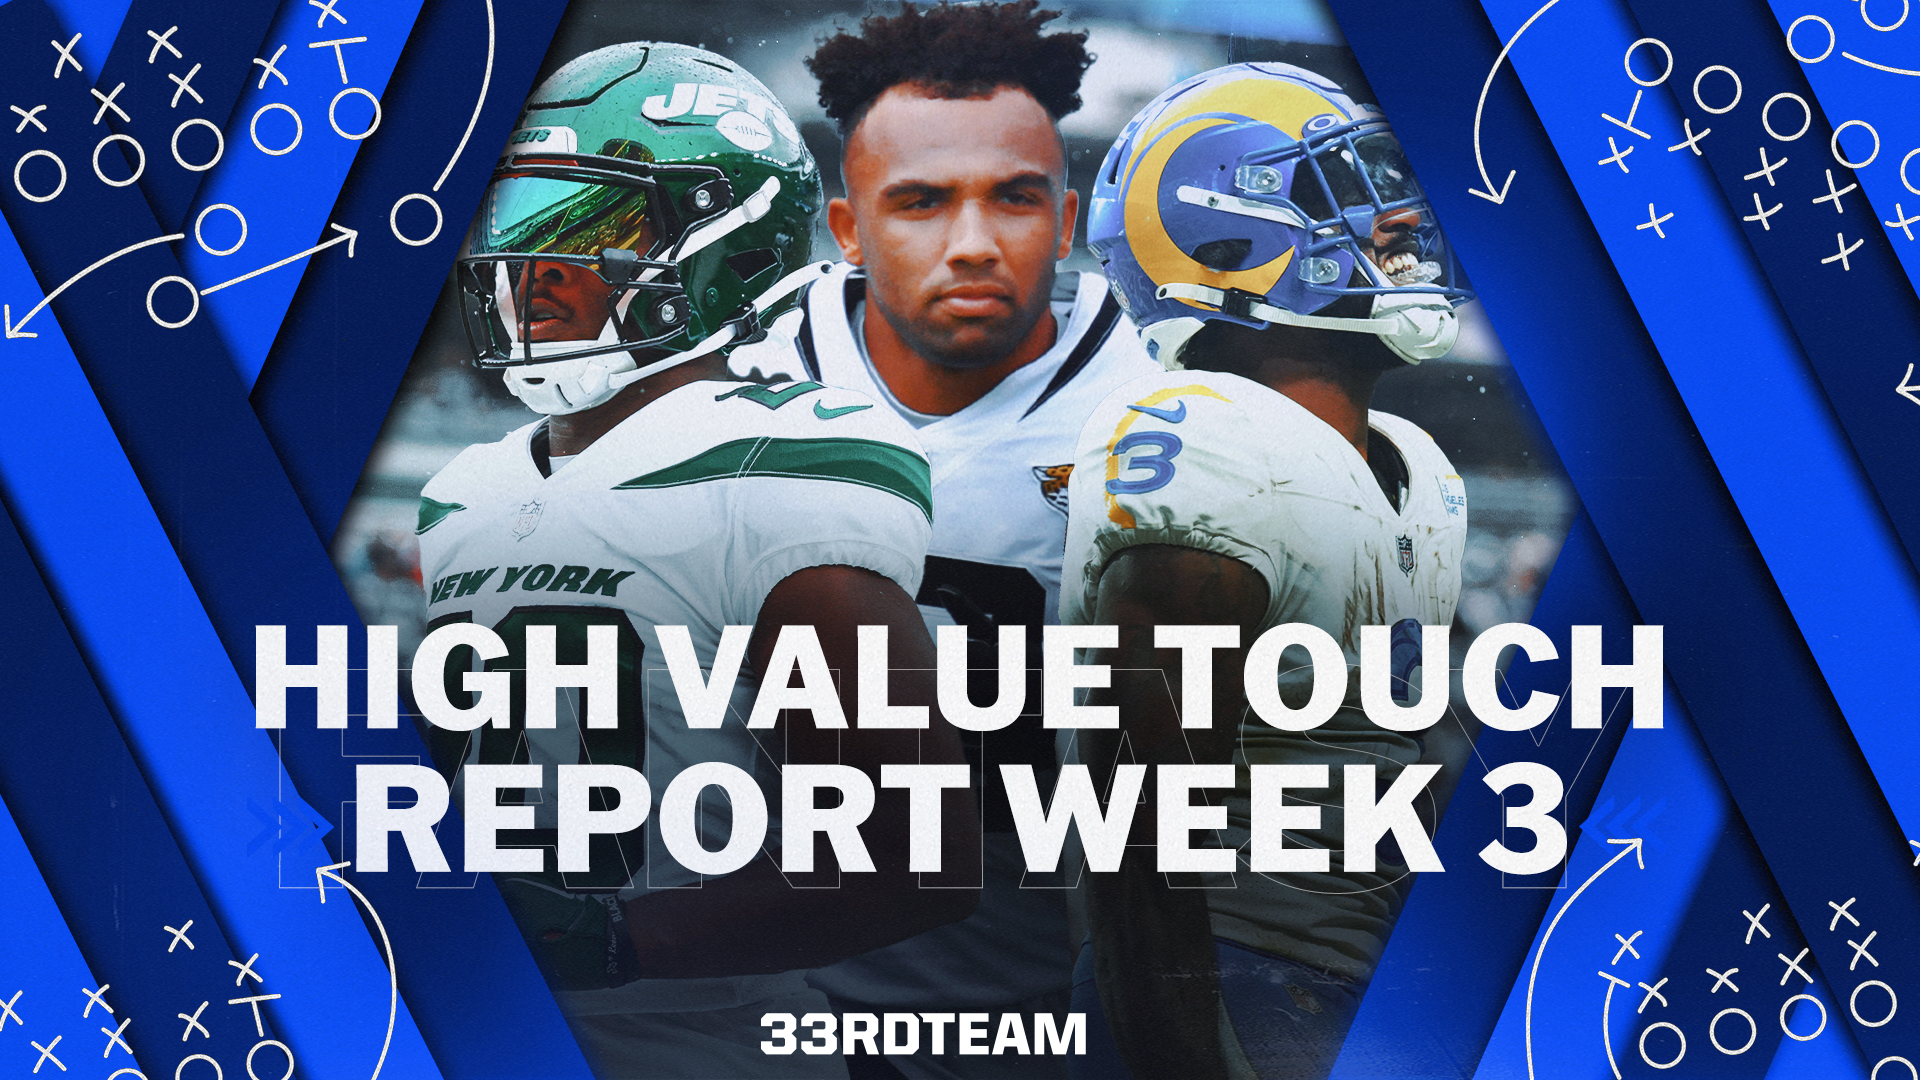 NFL Prop Bets Week 5: Riding high on DK Metcalf and Breece Hall